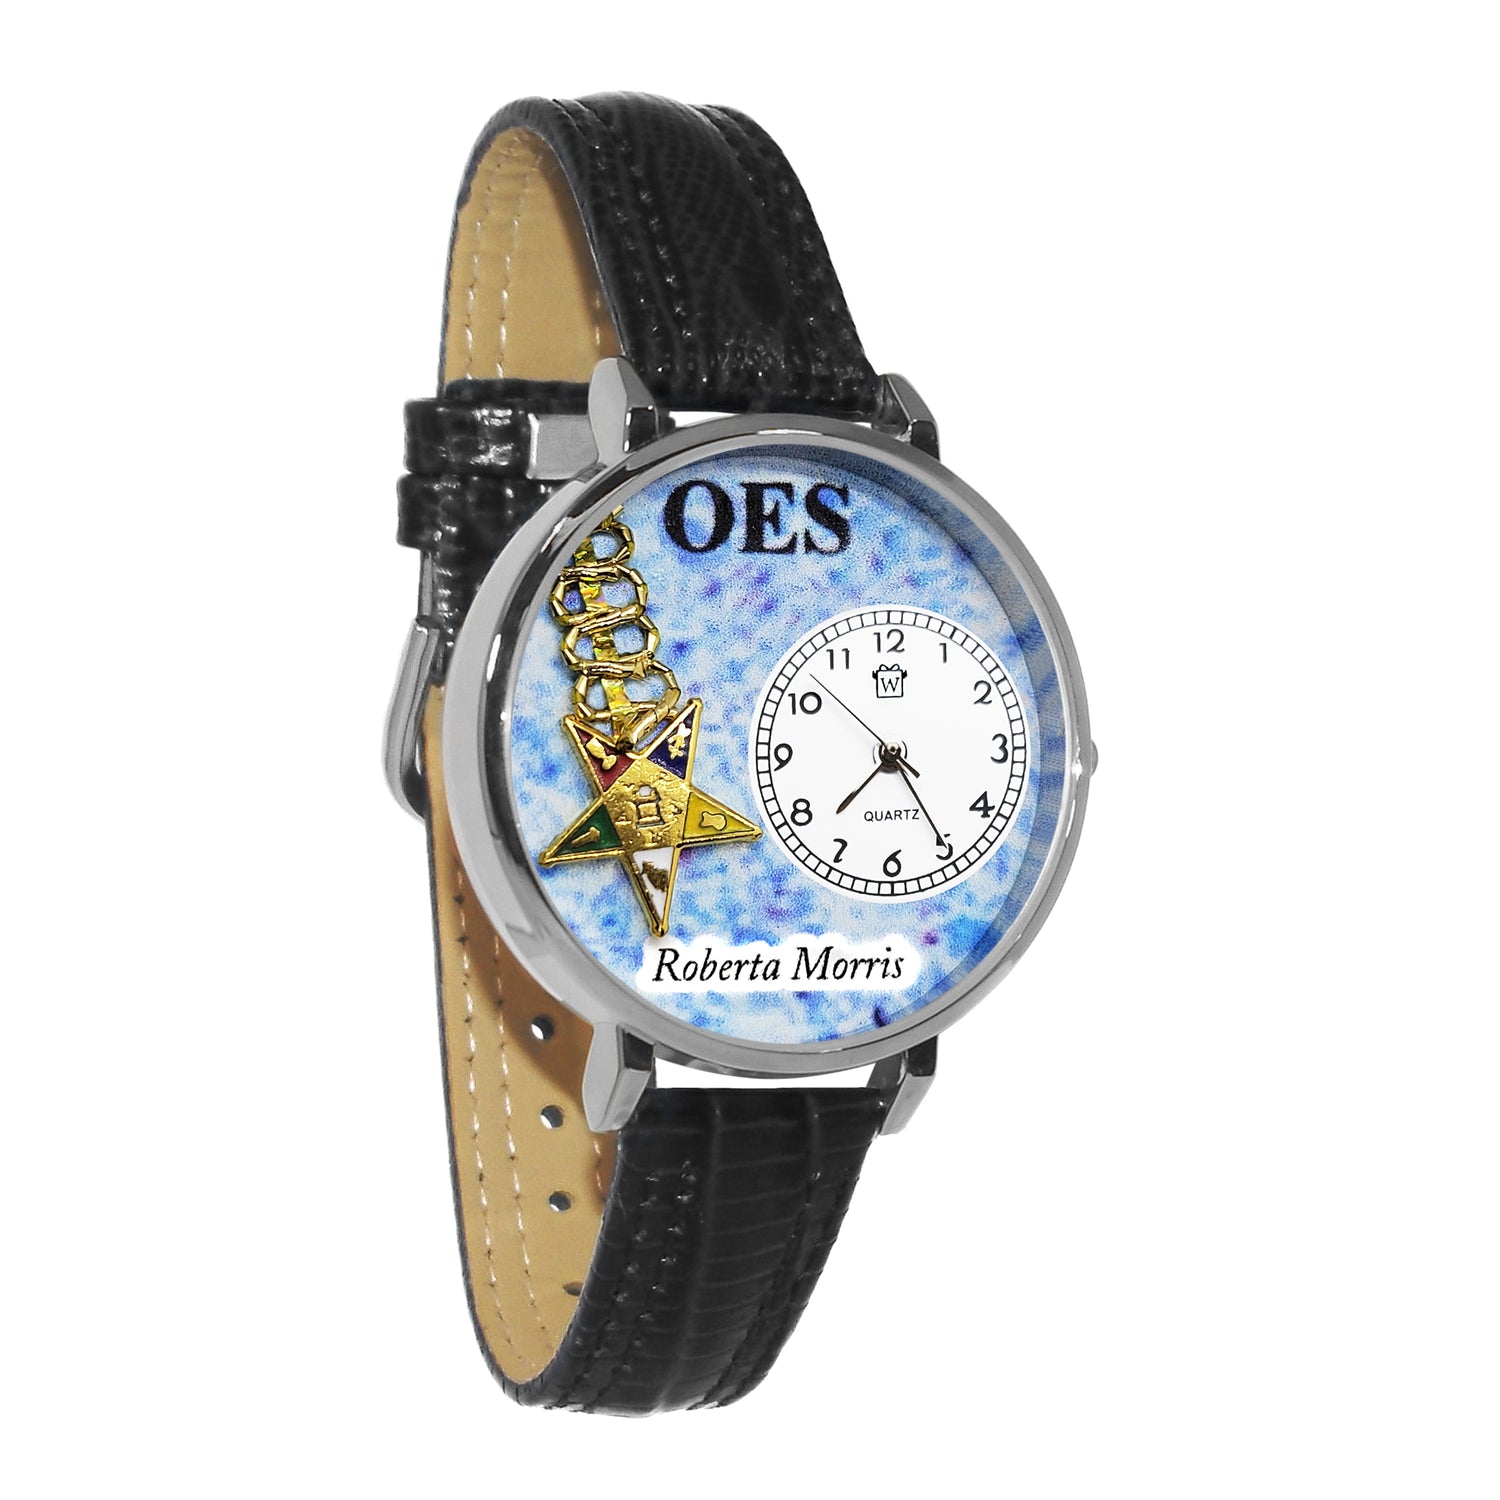 Whimsical Gifts | Personalized Order of the Eastern Star 3D Watch Large Style | Handmade in USA | Hobbies & Special Interests | Order of the Eastern Star | Novelty Unique Fun Miniatures Gift | Silver Finish Black Leather Watch Band